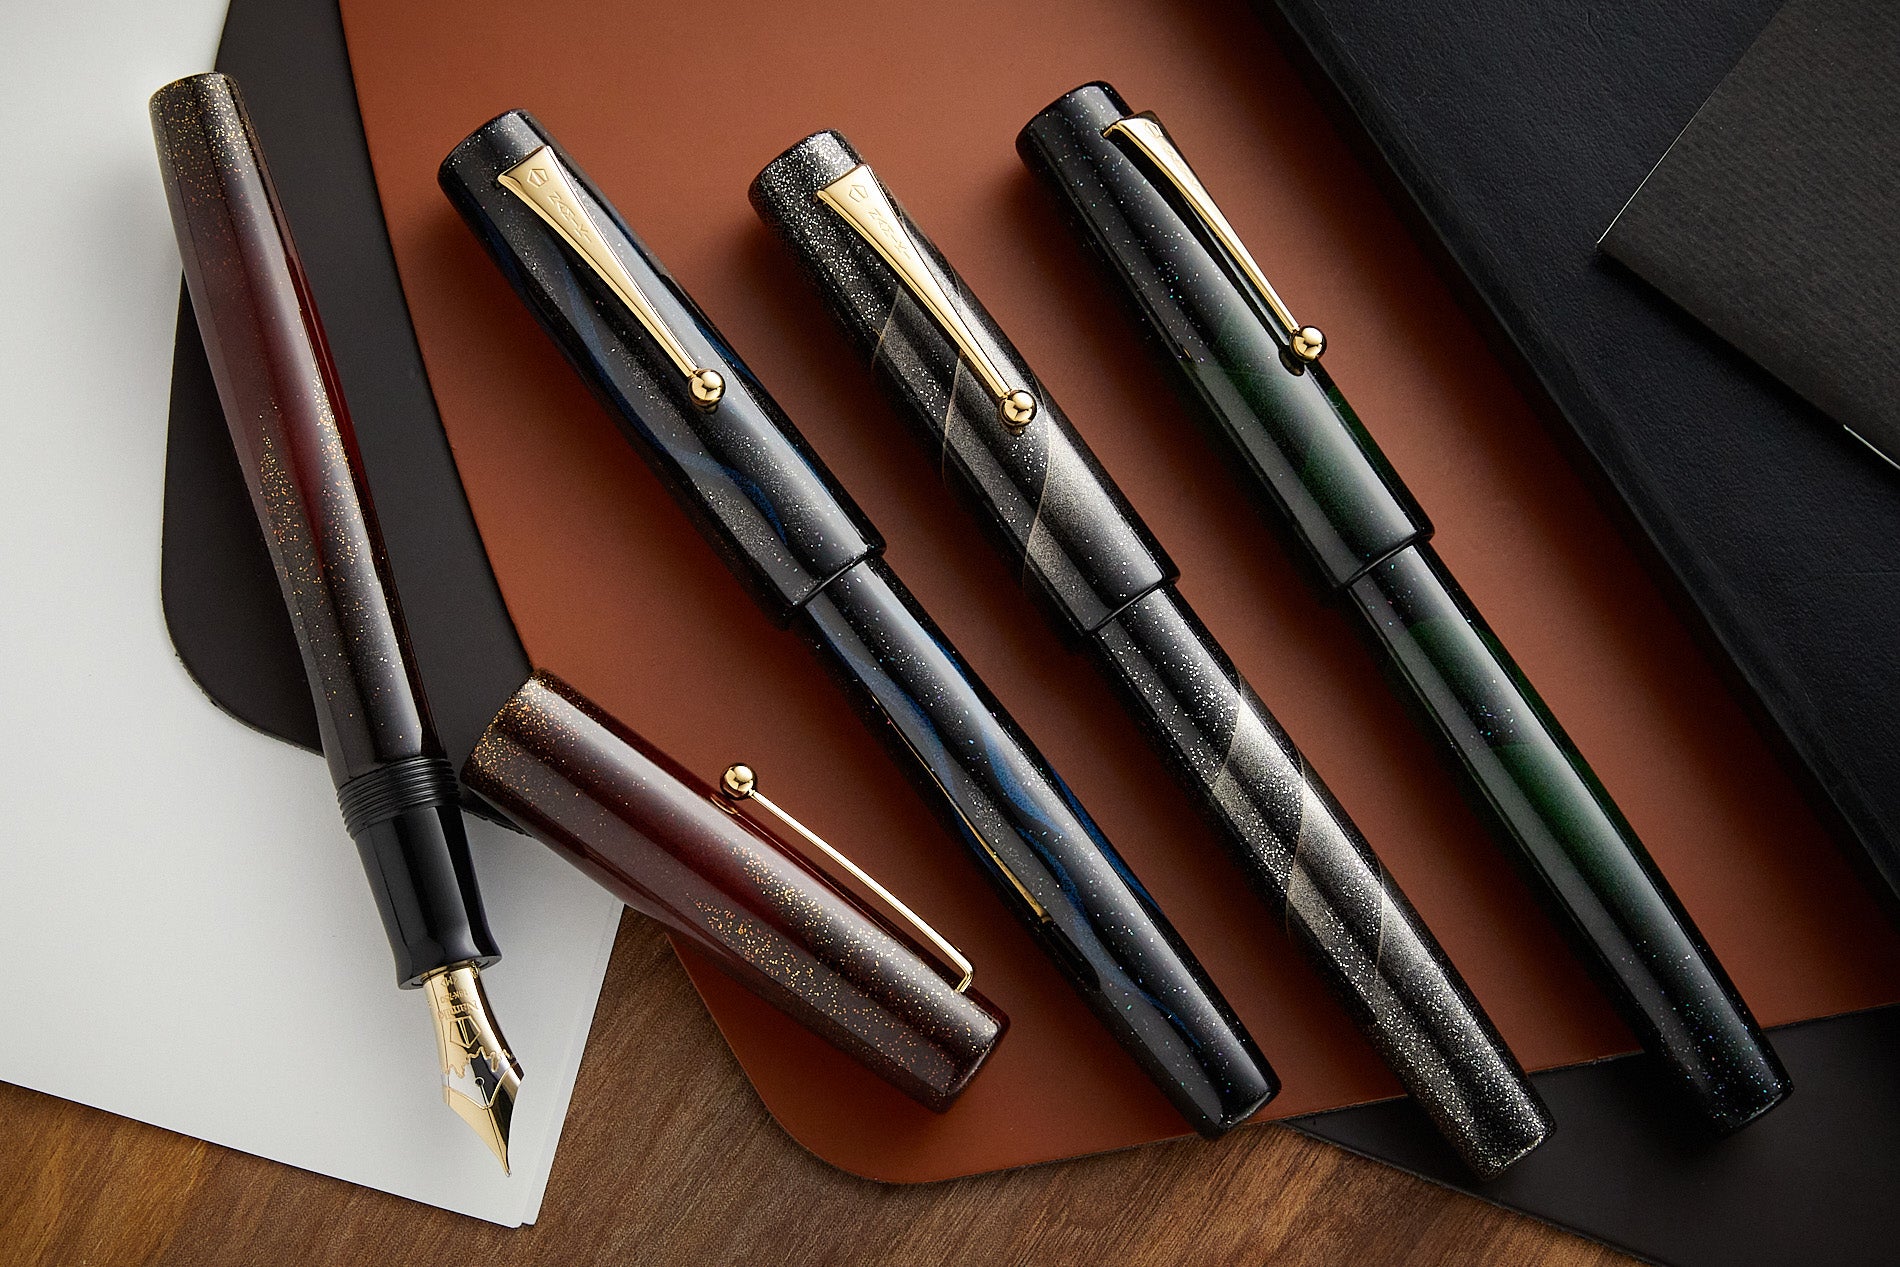 Four Namiki Aya Maki-e fountan pens on a leather writing matt and desk background. Pens are in assorted designs, all muted colors